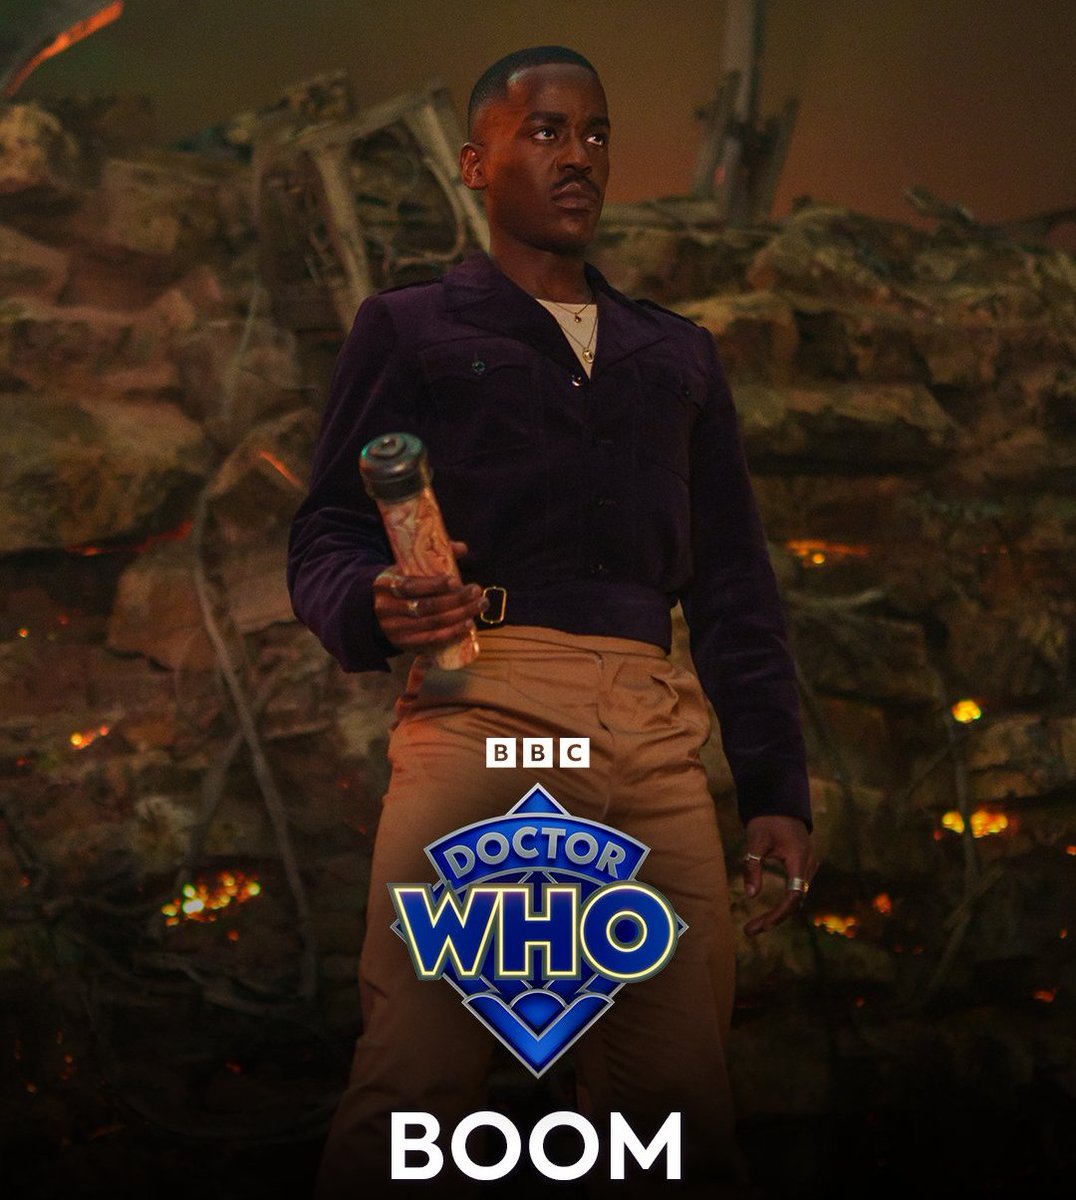 Ncuti Gatwa. You have just delivered an all-time great Doctor Who performance. Simply astonishing.